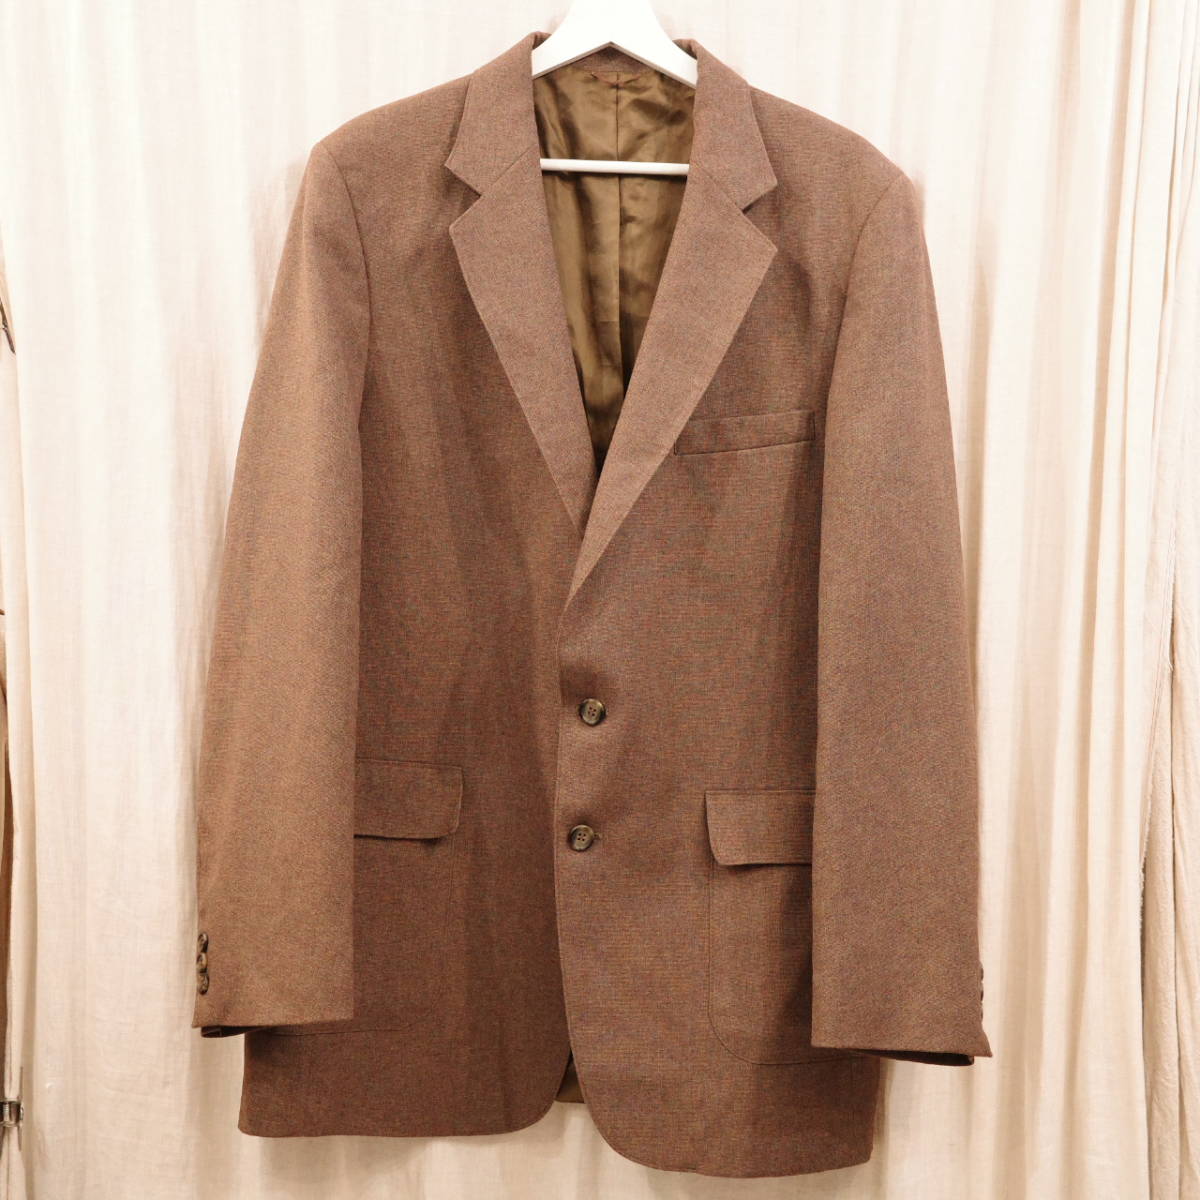 Levi's Action suit 2B jacket Brown 42L MADE IN USA リーバイス アクション スーツ